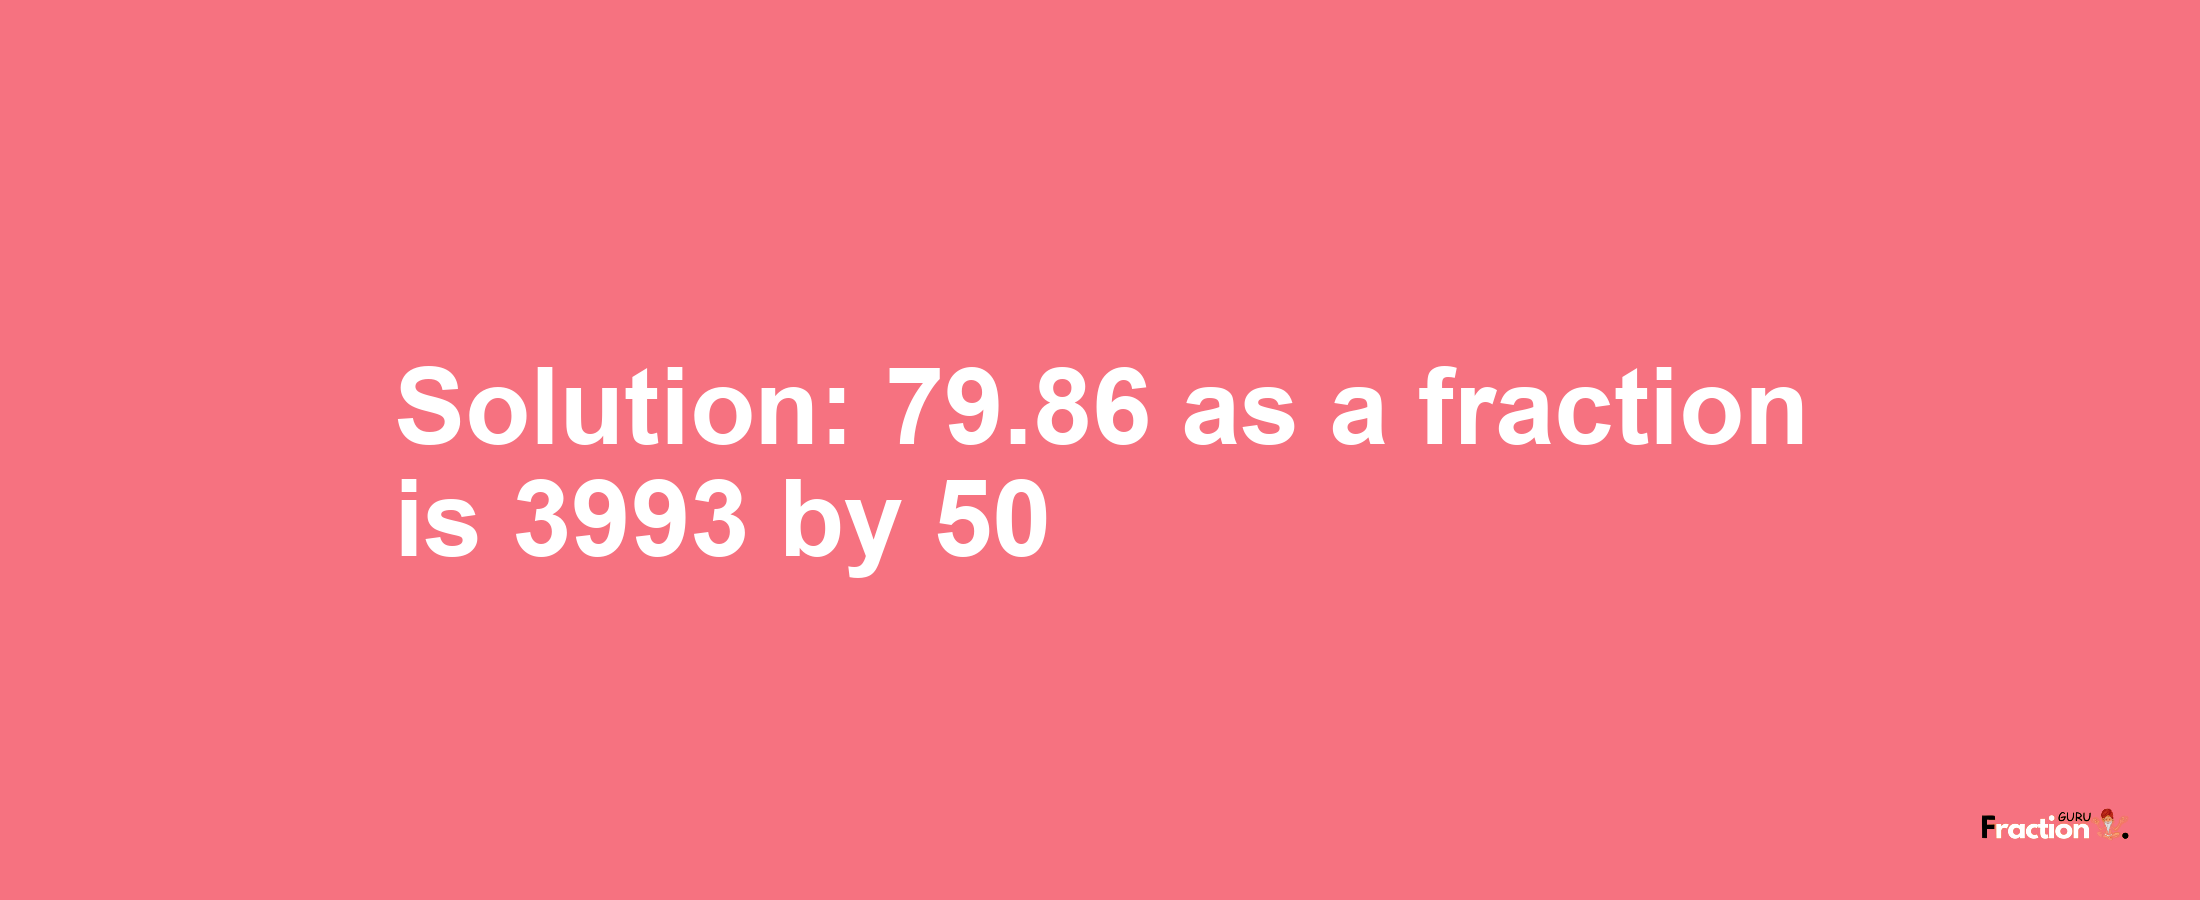 Solution:79.86 as a fraction is 3993/50